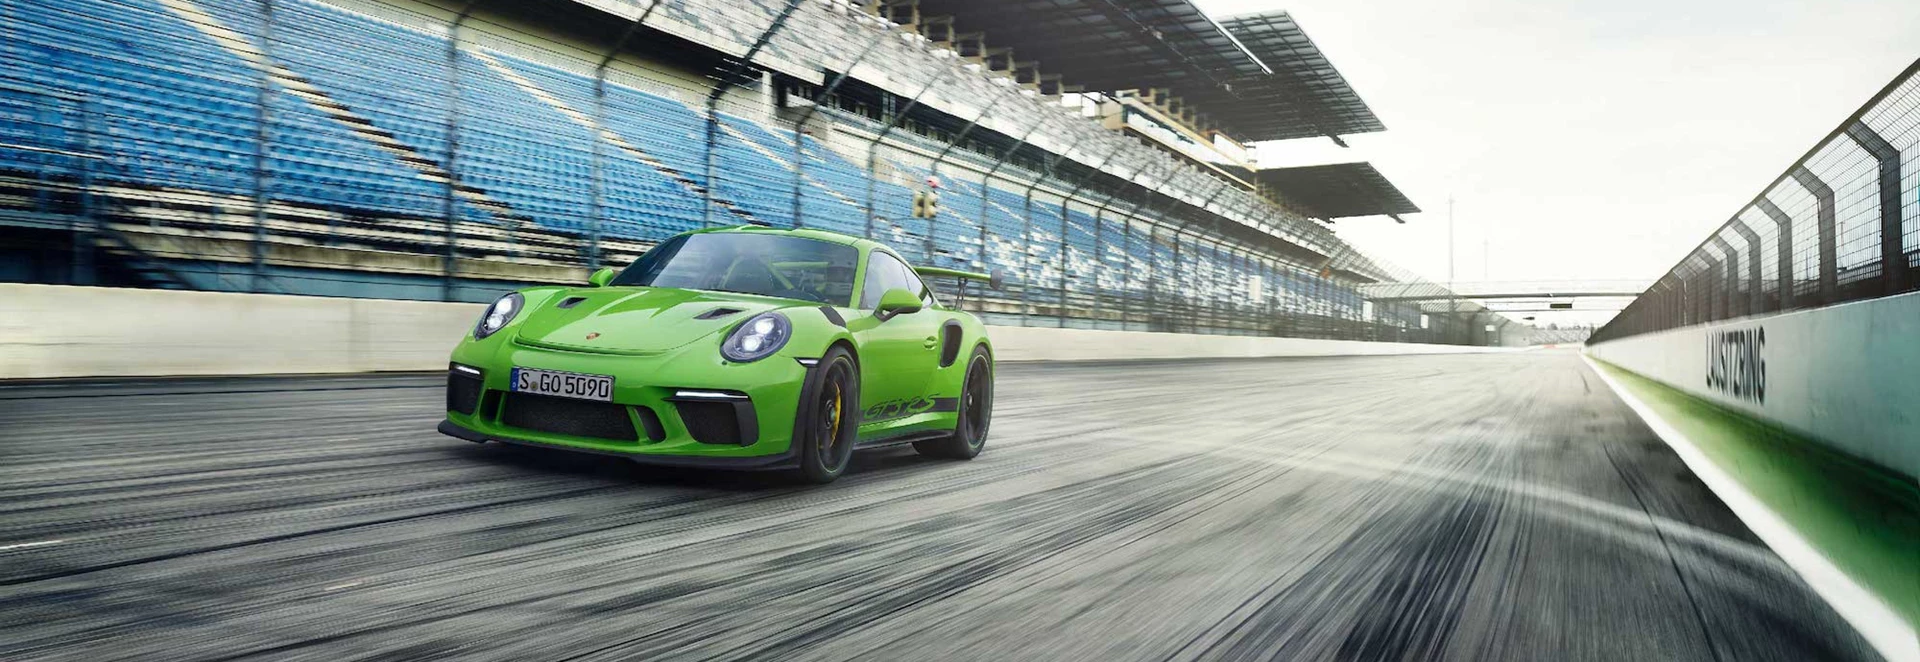 Porsche takes covers off new 911 GT3 RS